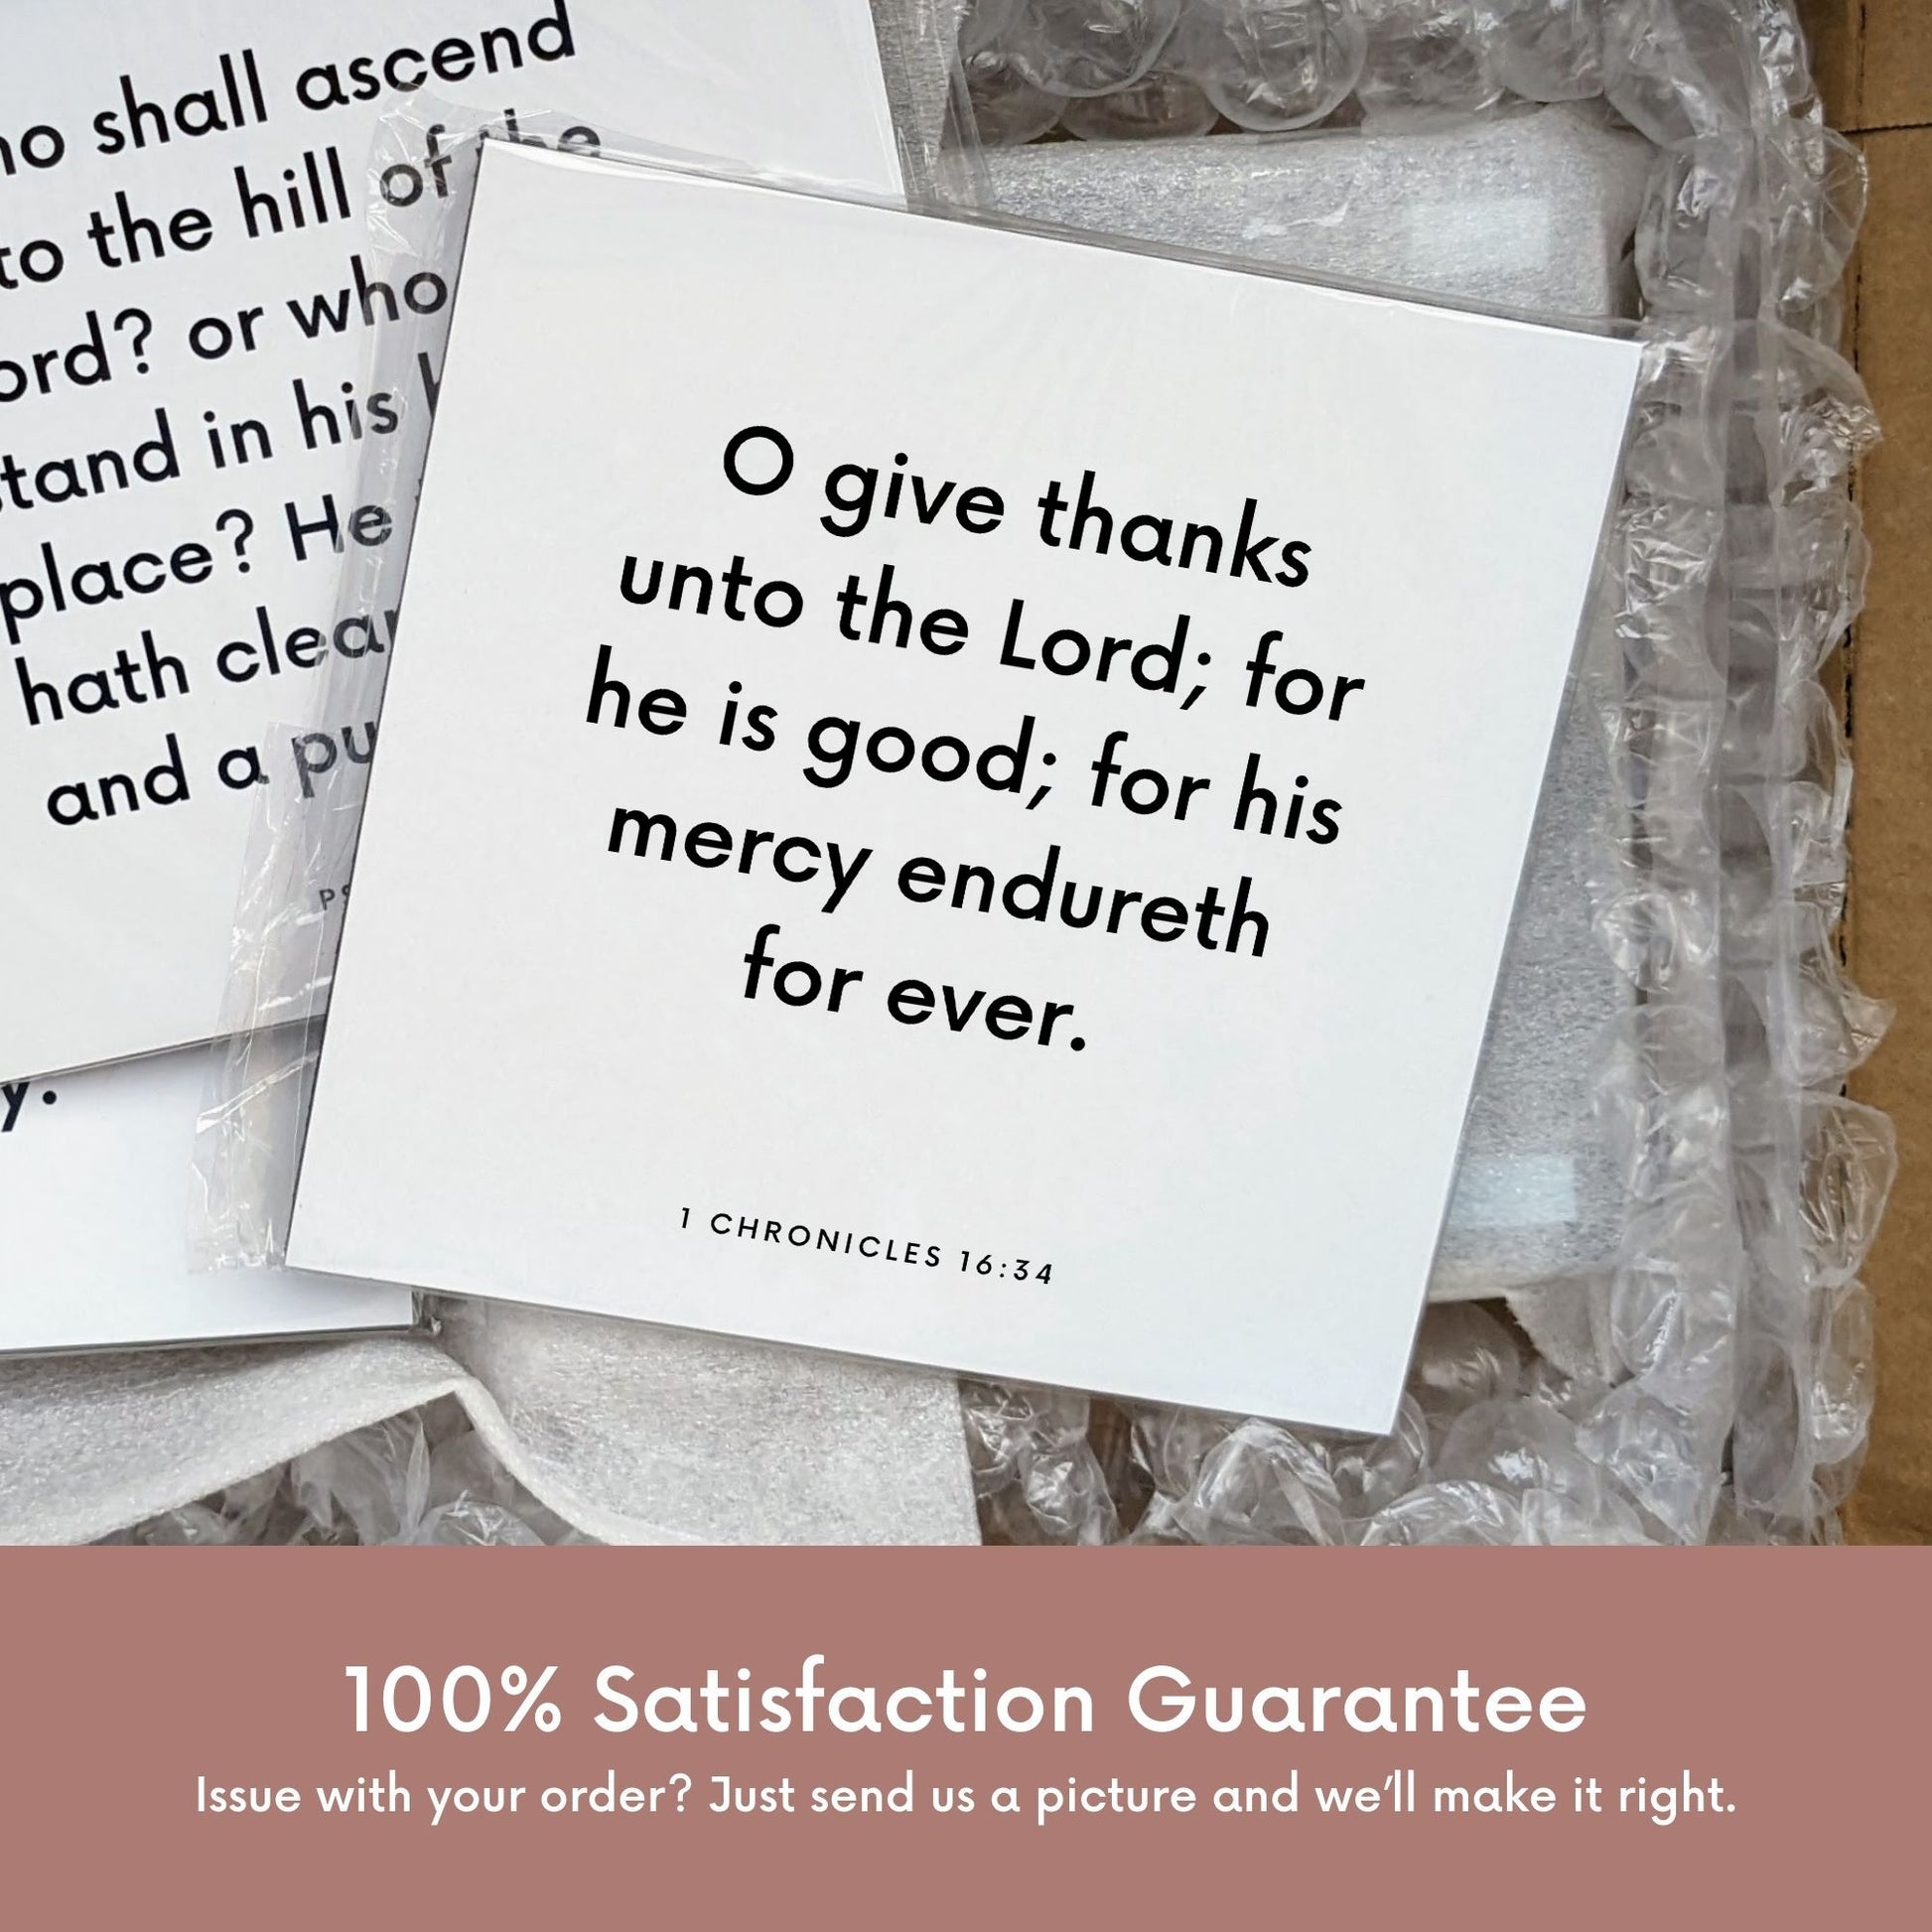 Shipping materials for scripture tile of 1 Chronicles 16:34 - "O give thanks unto the Lord; for he is good"